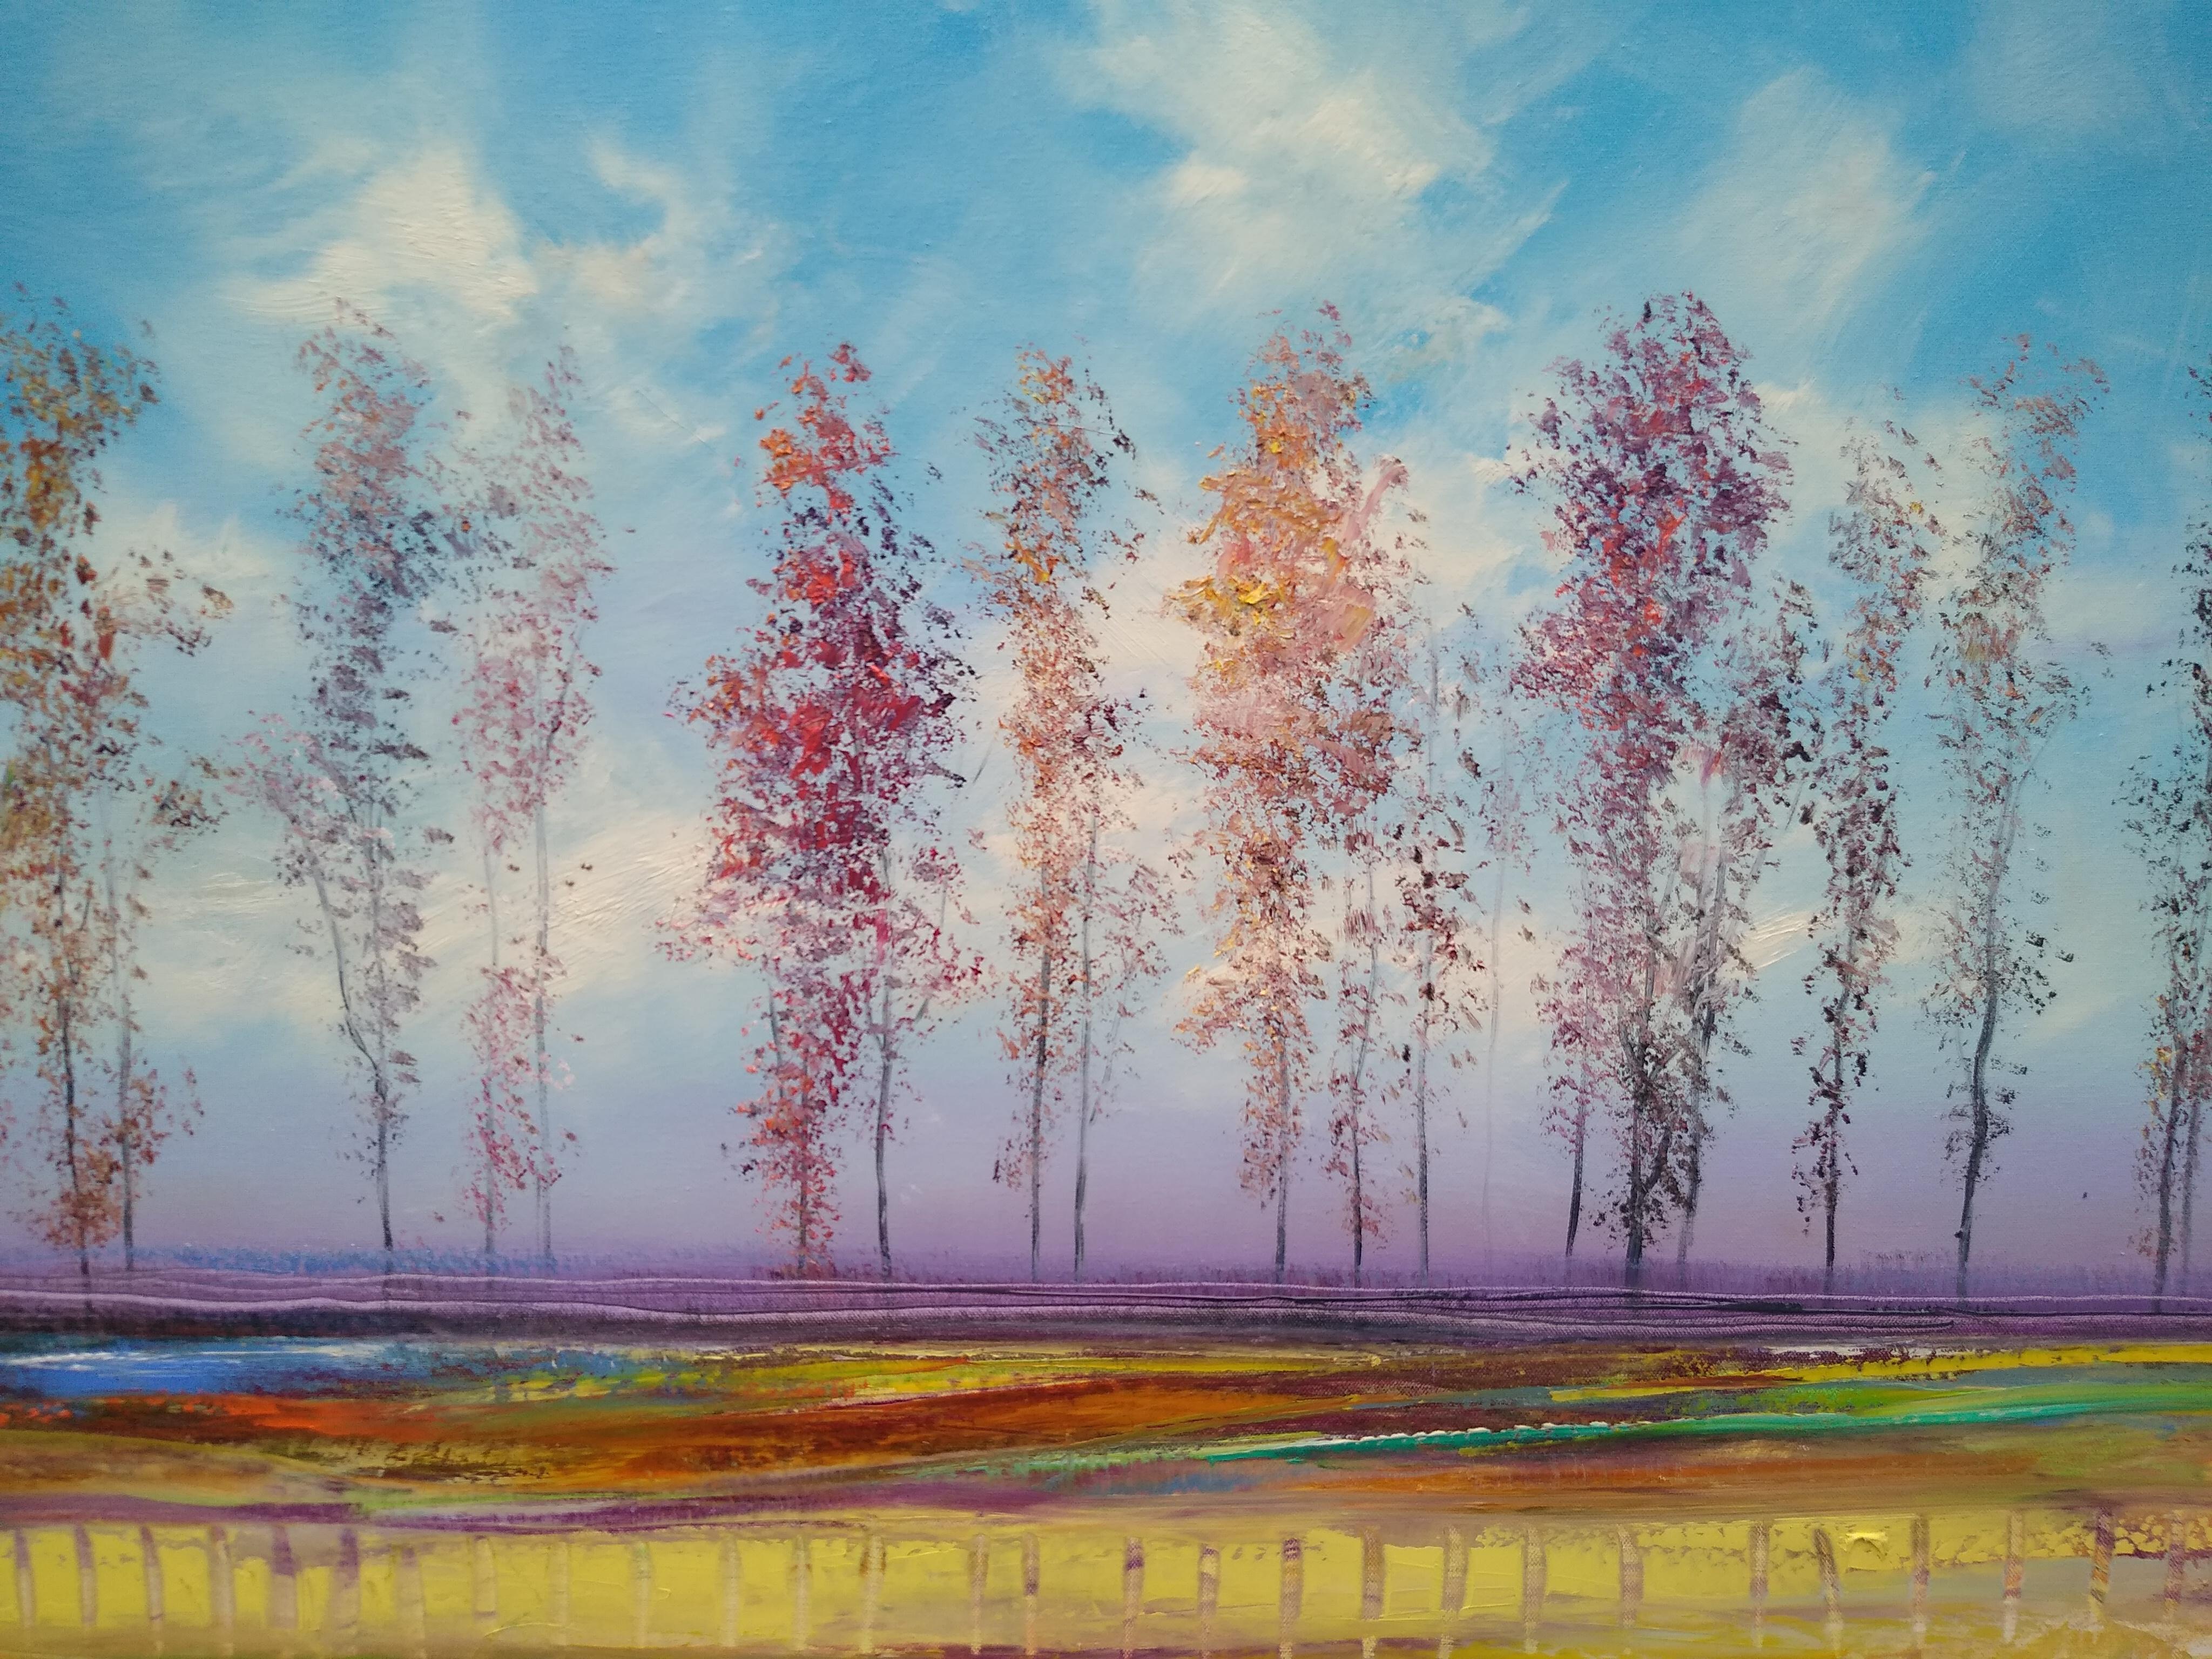 <p>Artist Comments<br>Willowy trees stand tall under a soft blue sky in this expressionist autumn display by artist George Peebles. A pool of water in the foreground reflects the sky in perfect color contrast to the dry earth. George Peebles is